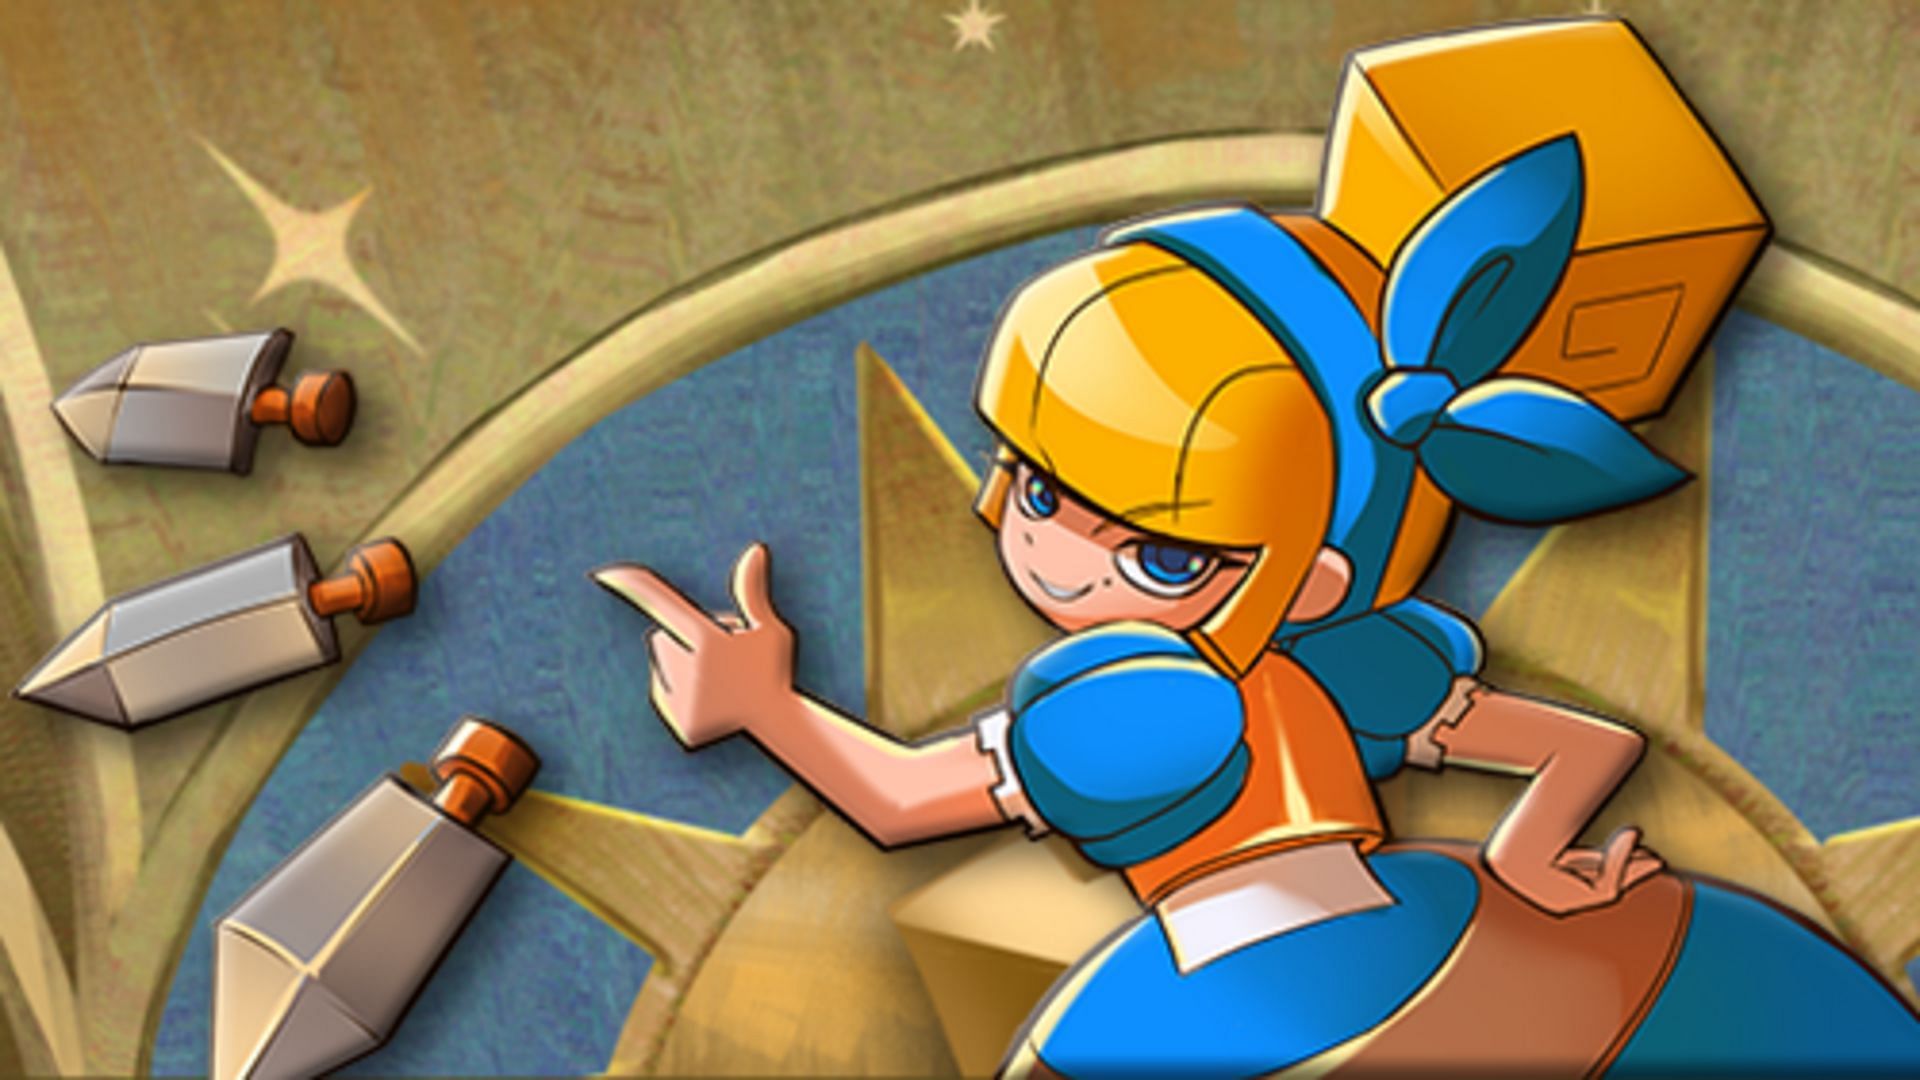 Dagger Duchess in Clash Royale (Image via Supercell)